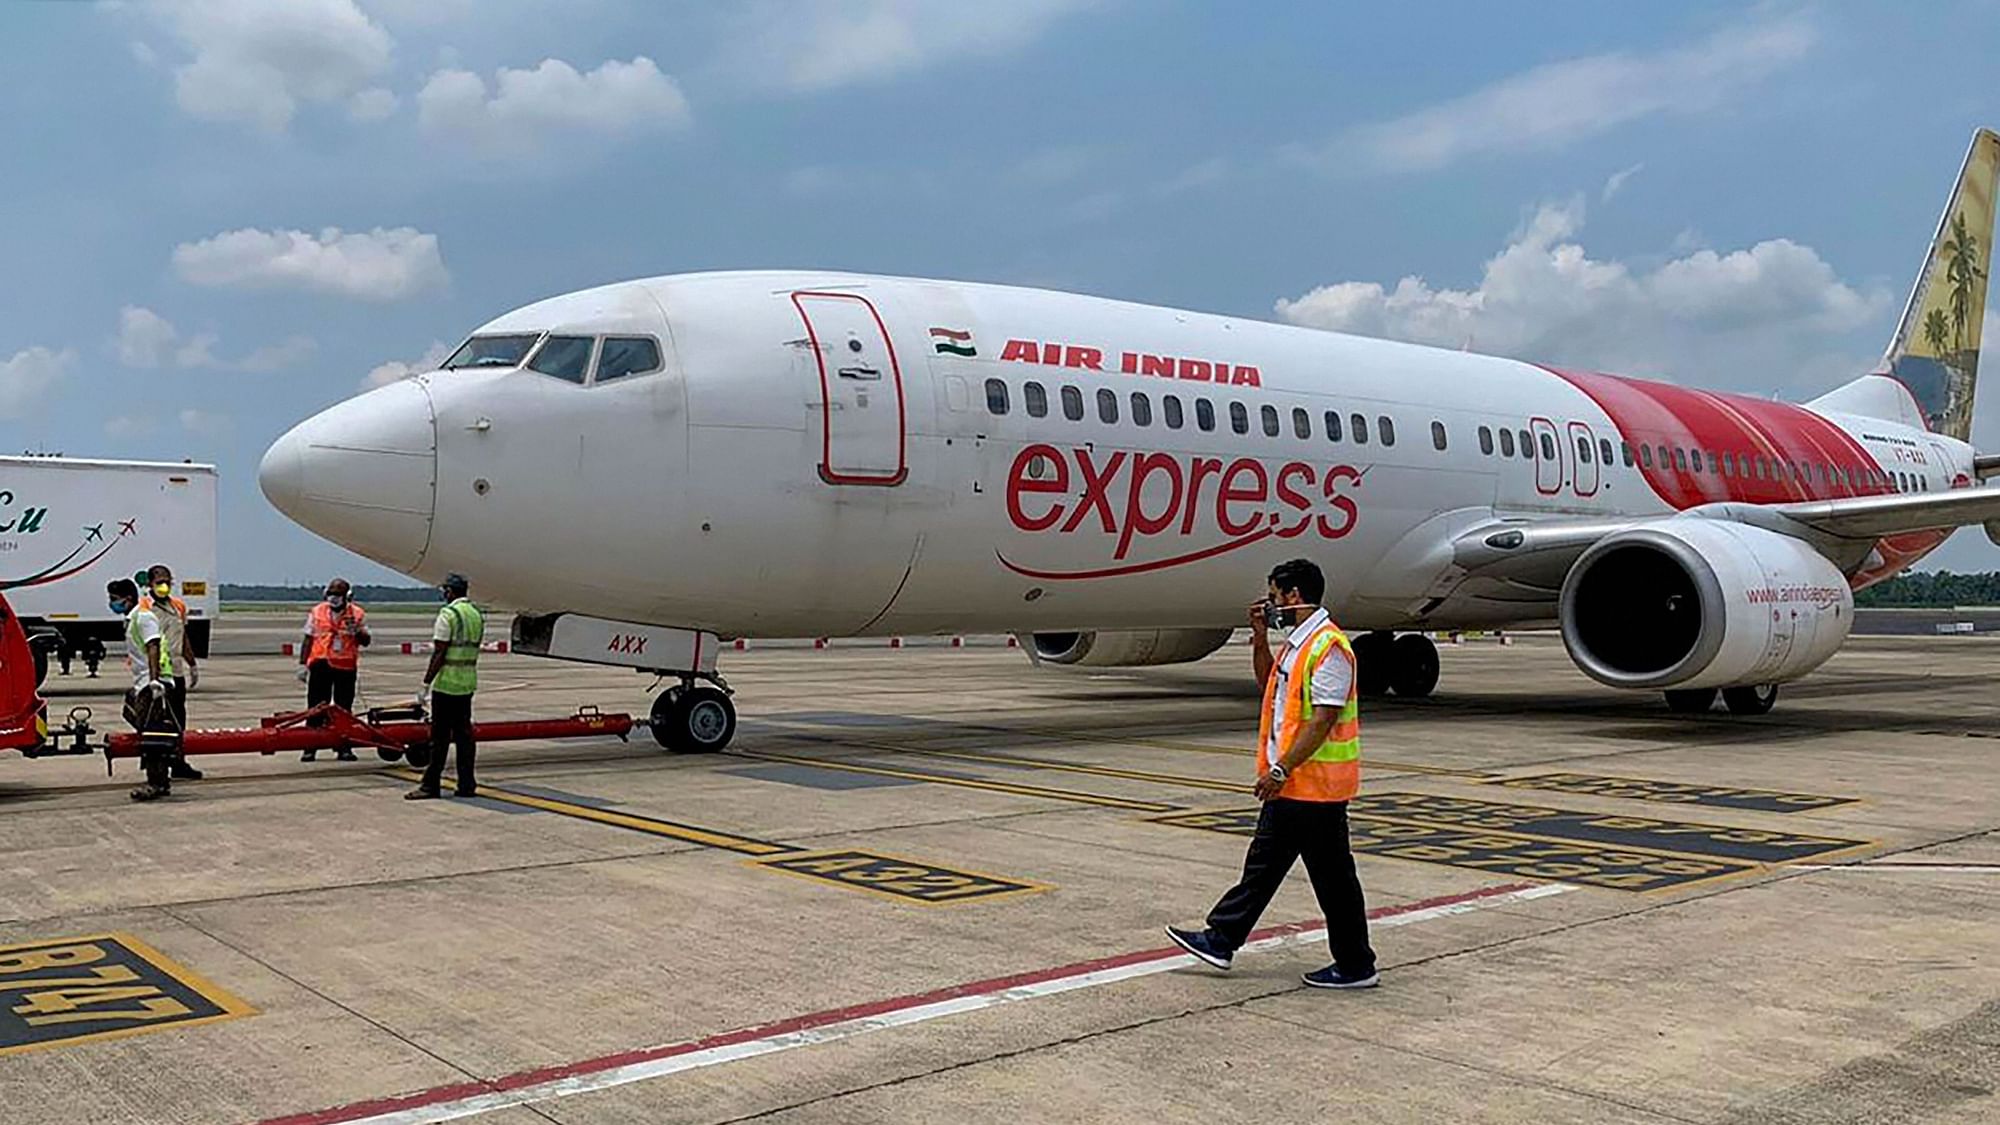 Airport staff carry out pre-departure checking of an Air India Express flight bound for UAE to bring back stranded Indian nationals, during the ongoing COVID-19 nationwide lockdown, in Kochi, on Thursday, 7 May 2020.